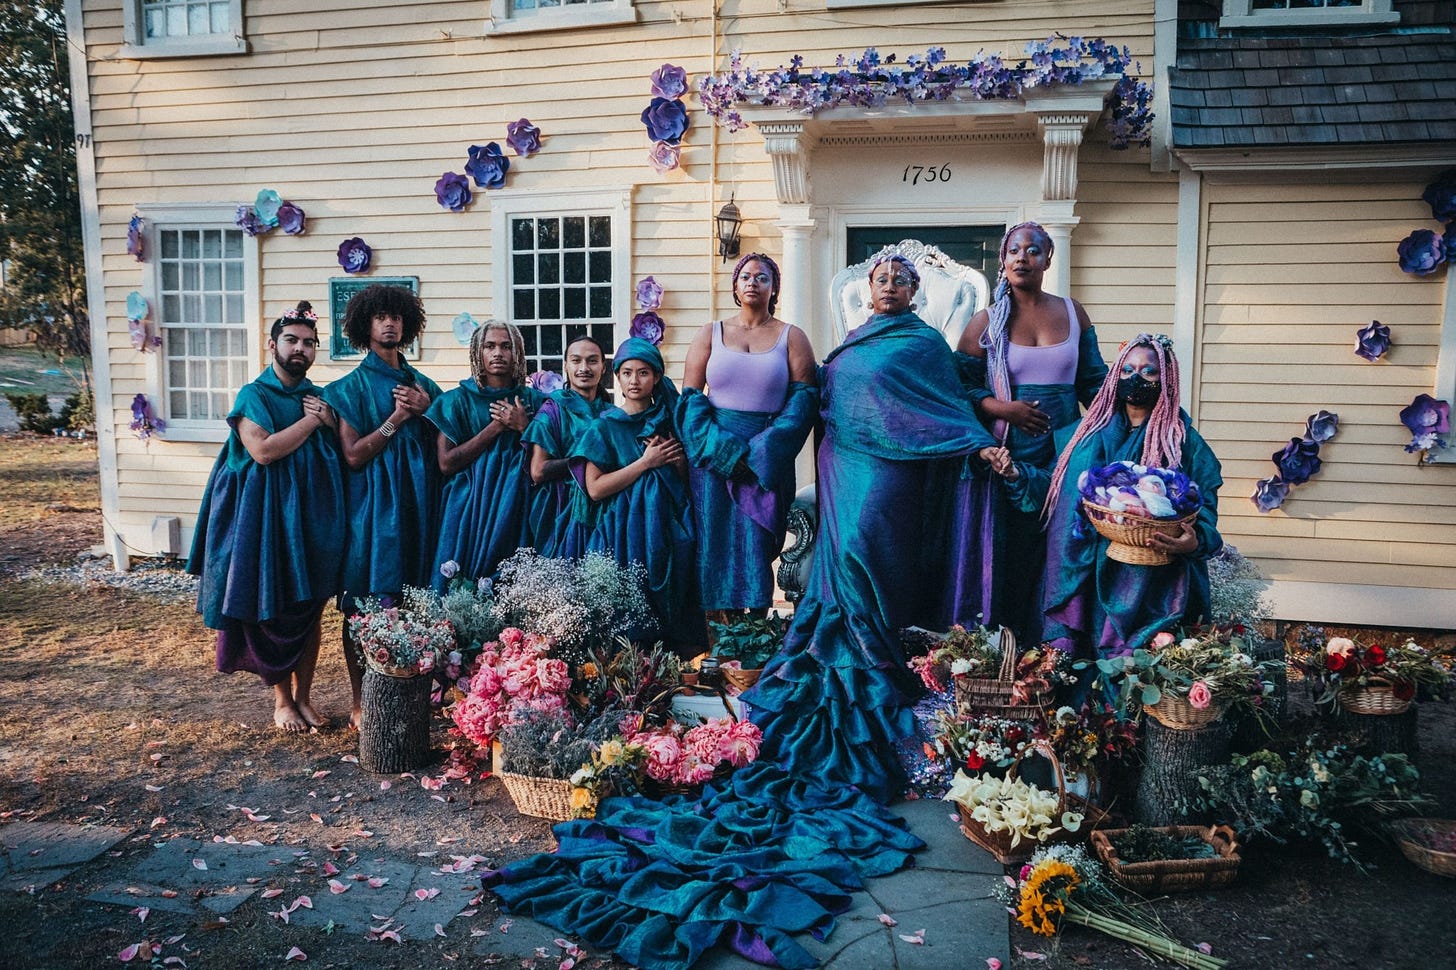 With the city’s support, Providence’s Haus of Glitter reclaimed a historic site whose 18th-century builder profited from slavery.